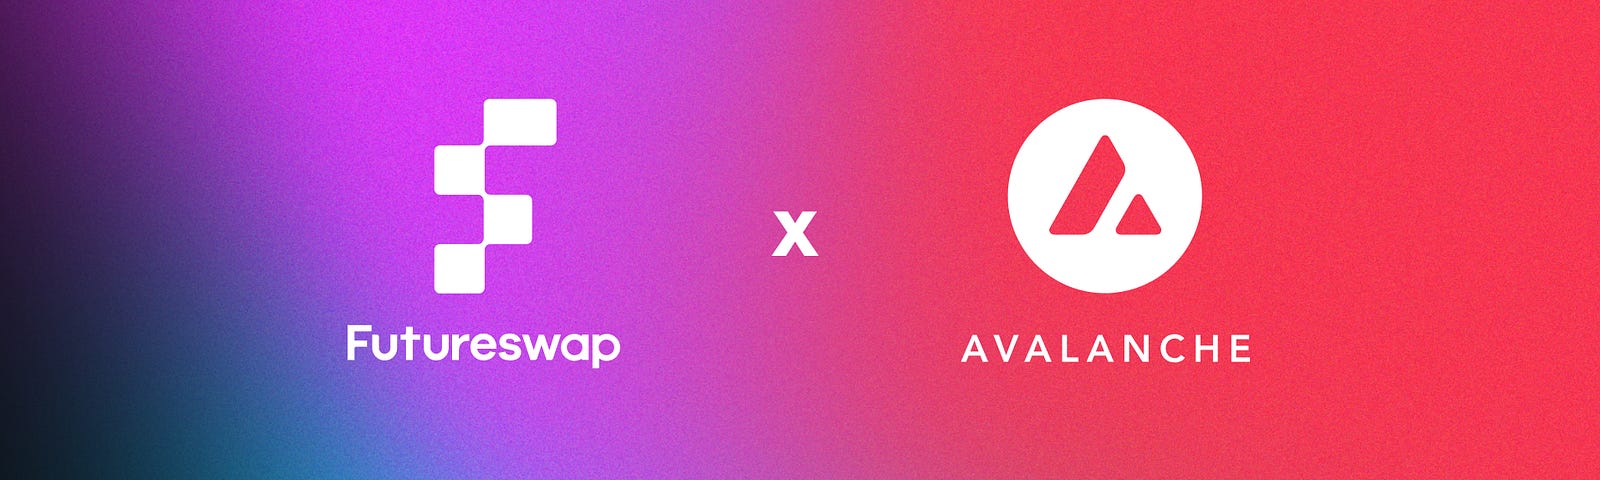 A gradient background with ‘Futureswap x Avalanche’ in text below the two companies’ logos